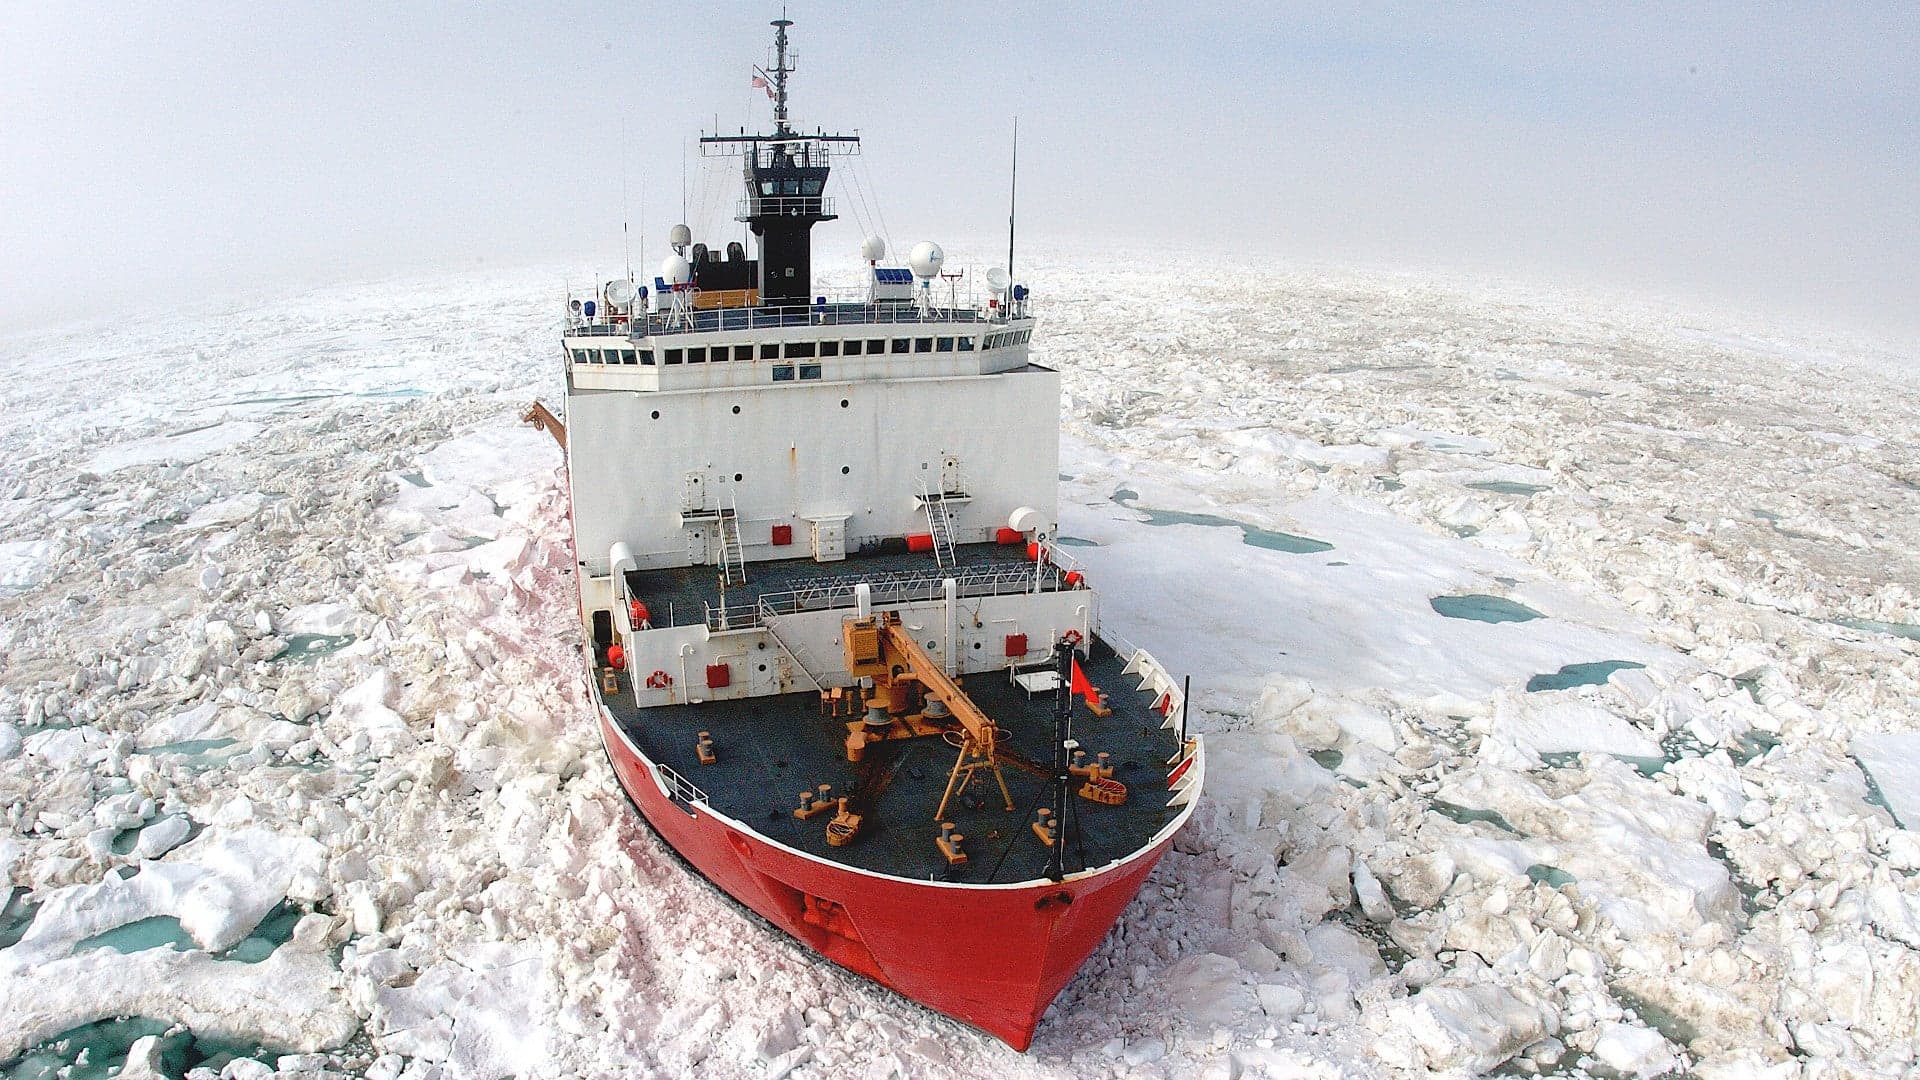 Trump Orders Coast Guard To Look Into Building Nuclear-Powered Icebreakers Like Russia